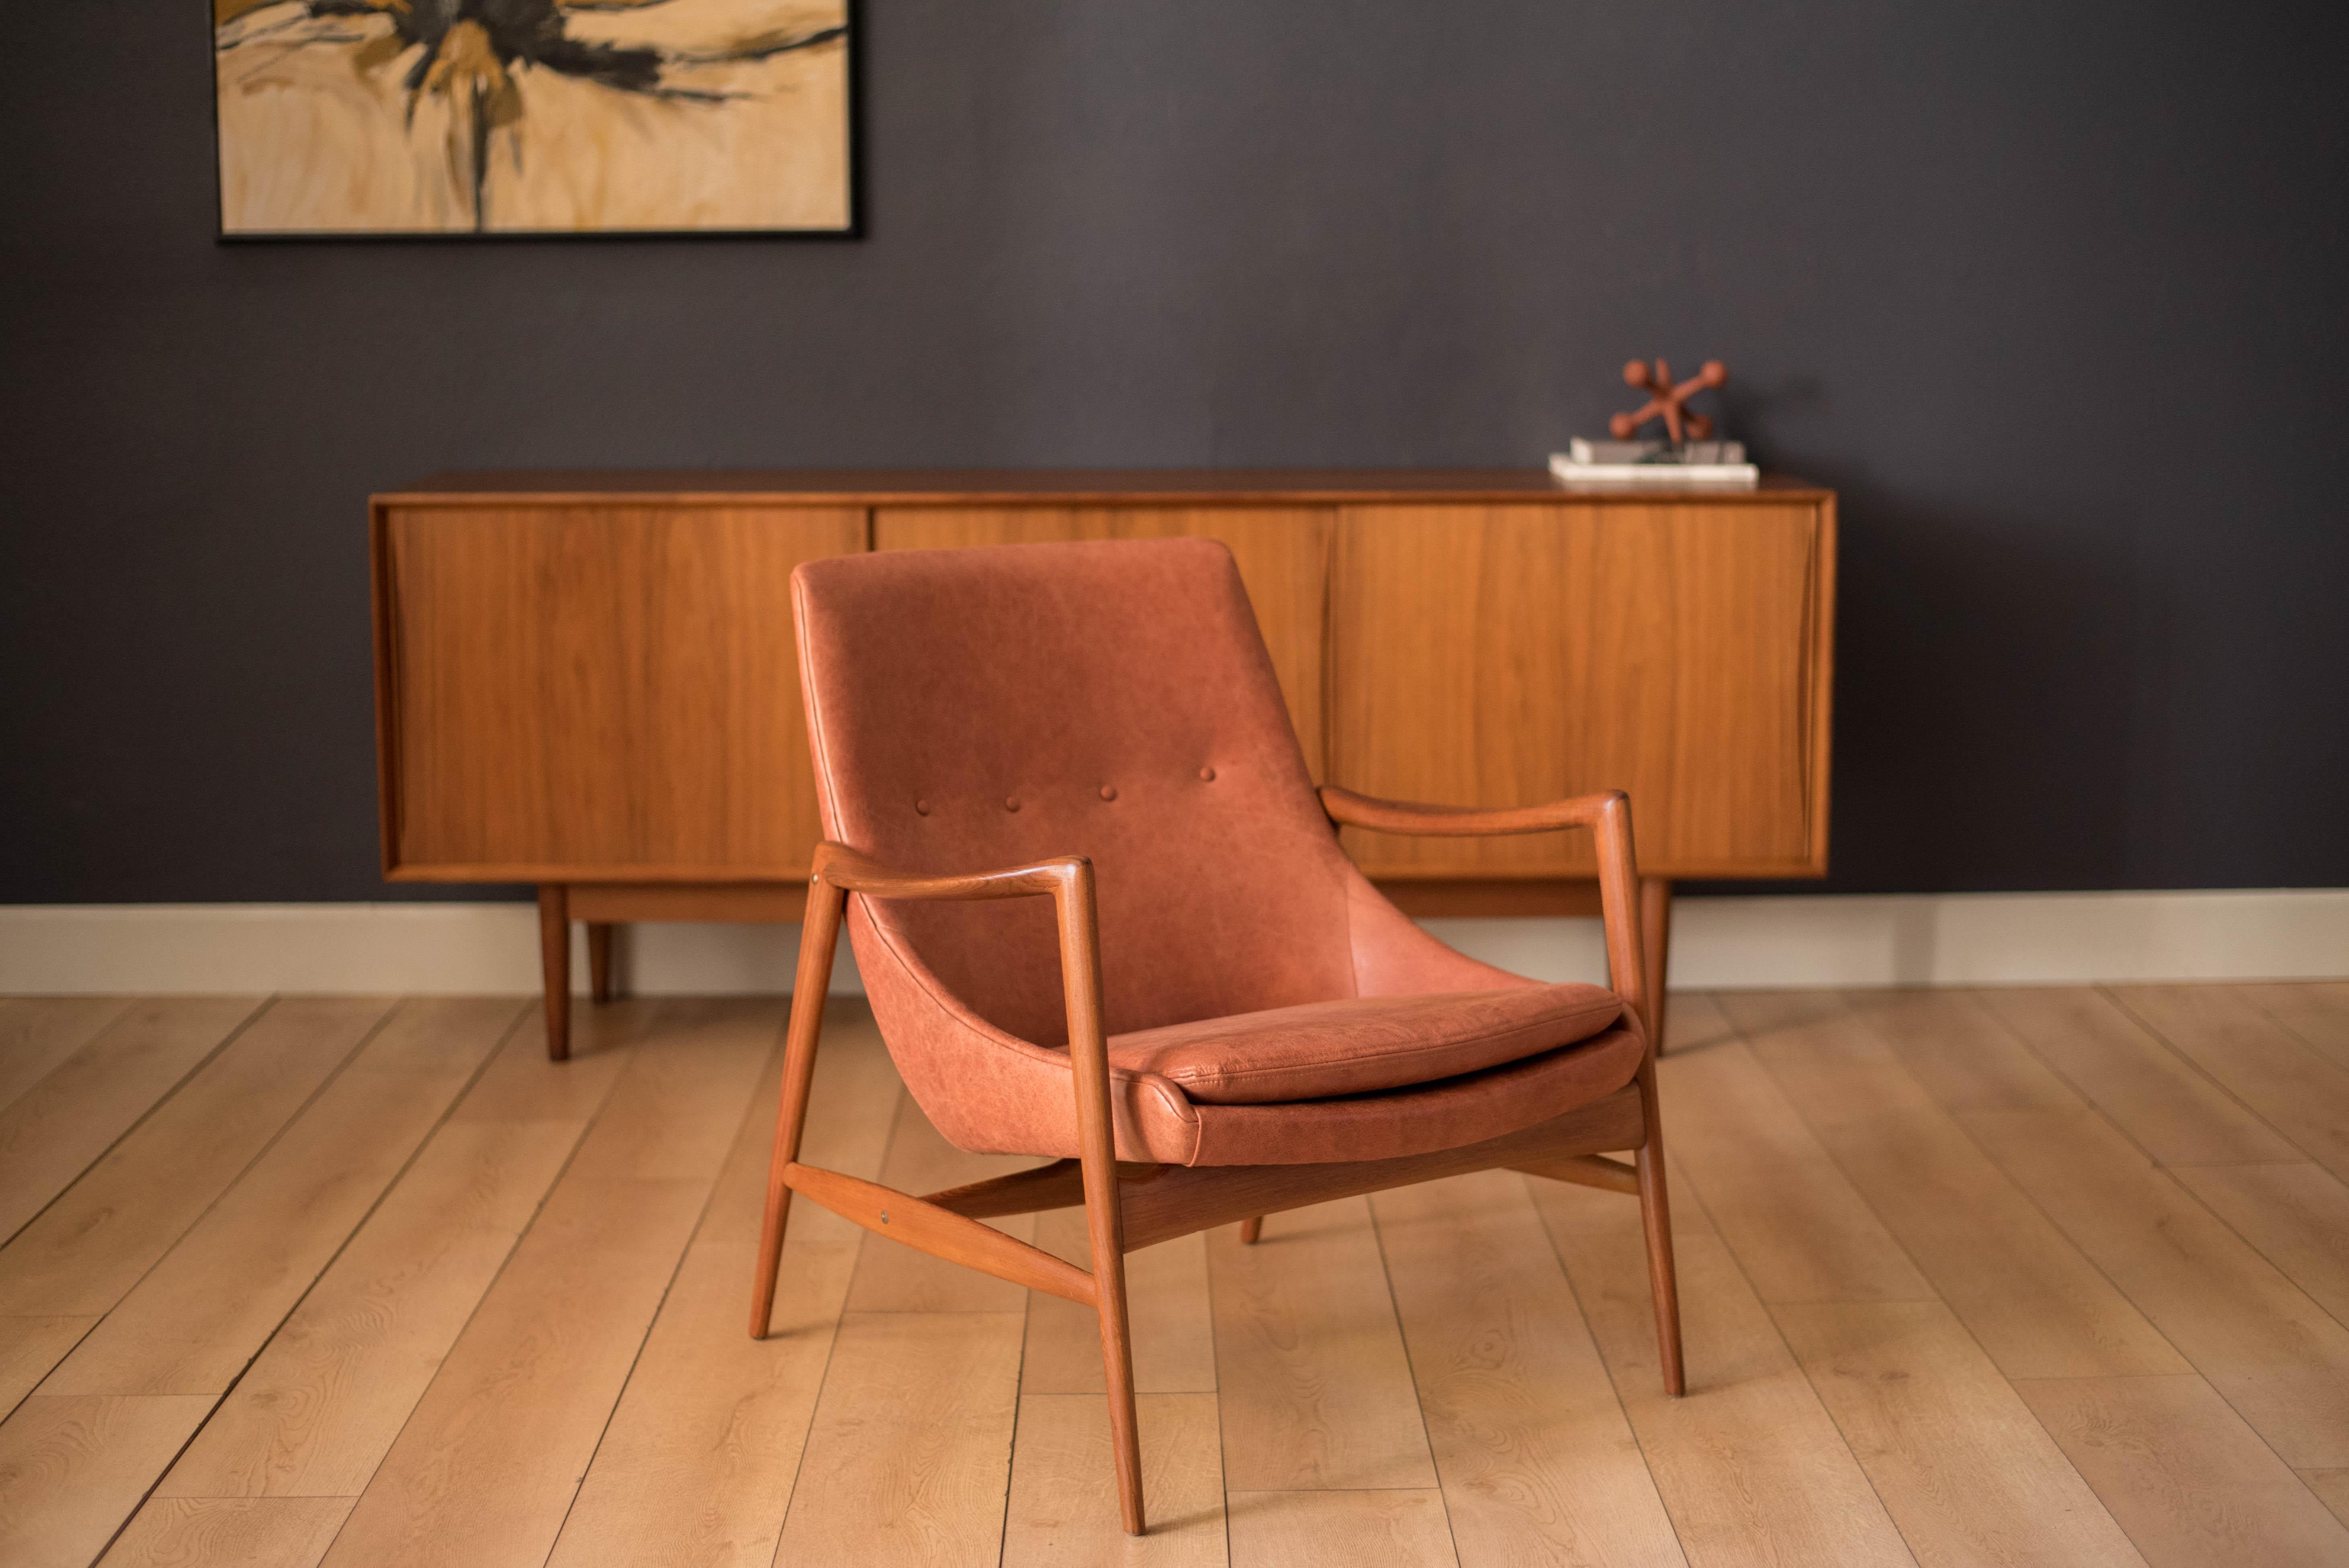 Mid-Century Modern easy armchair designed by Rolf Rastad & Adolf Relling for Dokka Möbler, circa 1950s. This piece features a sculptural teak frame and has been newly reupholstered in a natural camel tone leather.